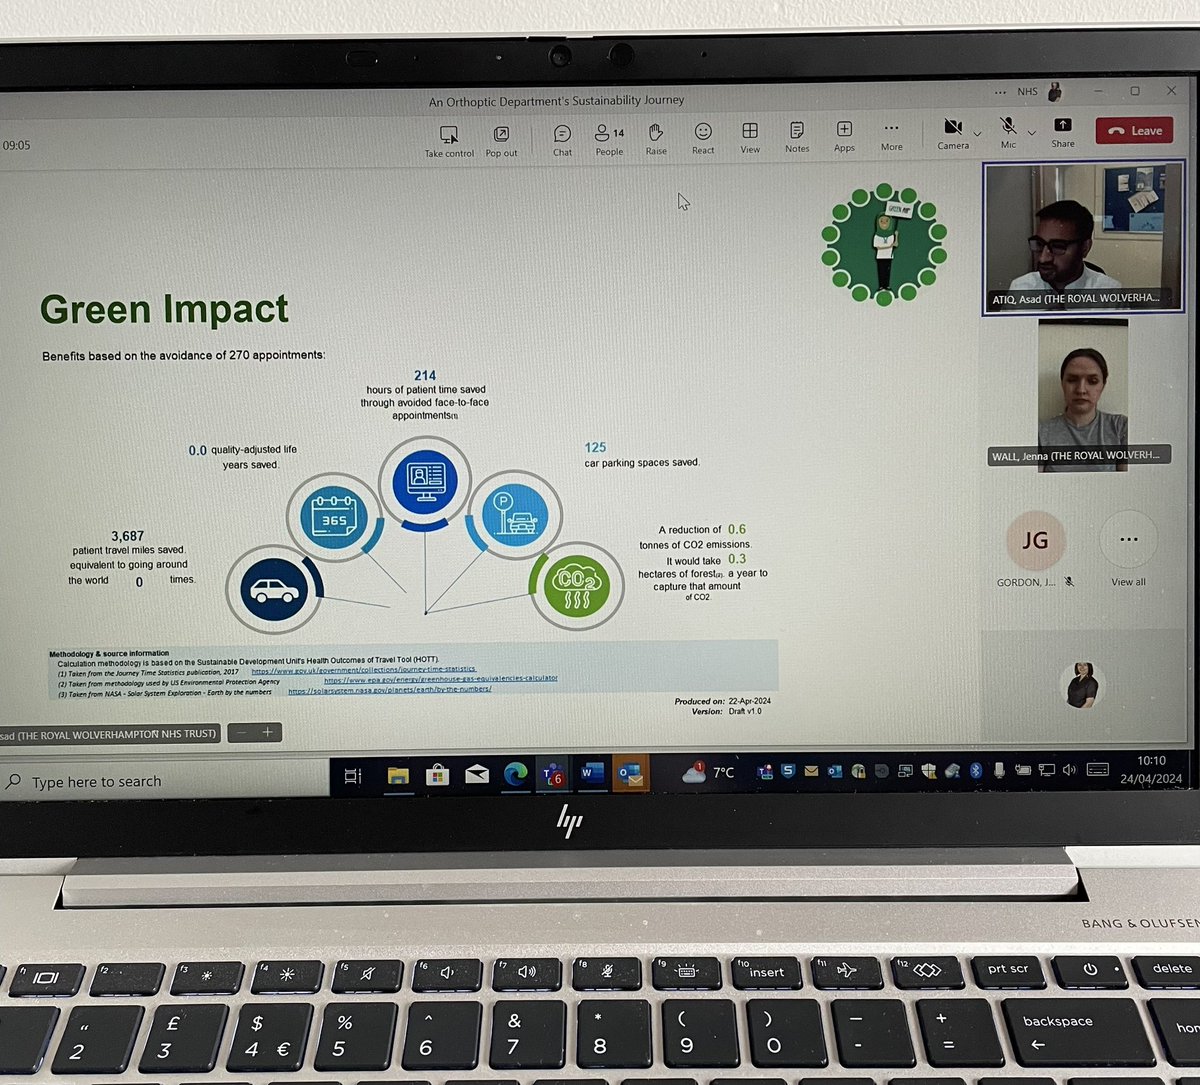 Some fantastic FREE webinars this week for #GreenerAHP week! Brilliant to hear Asad and Jenna present their sustainability journey this morning. Demonstrating the impact of small changes, making a difference to patient experience and our planet 🌎 @RWT_AHPs @RWT_NHS